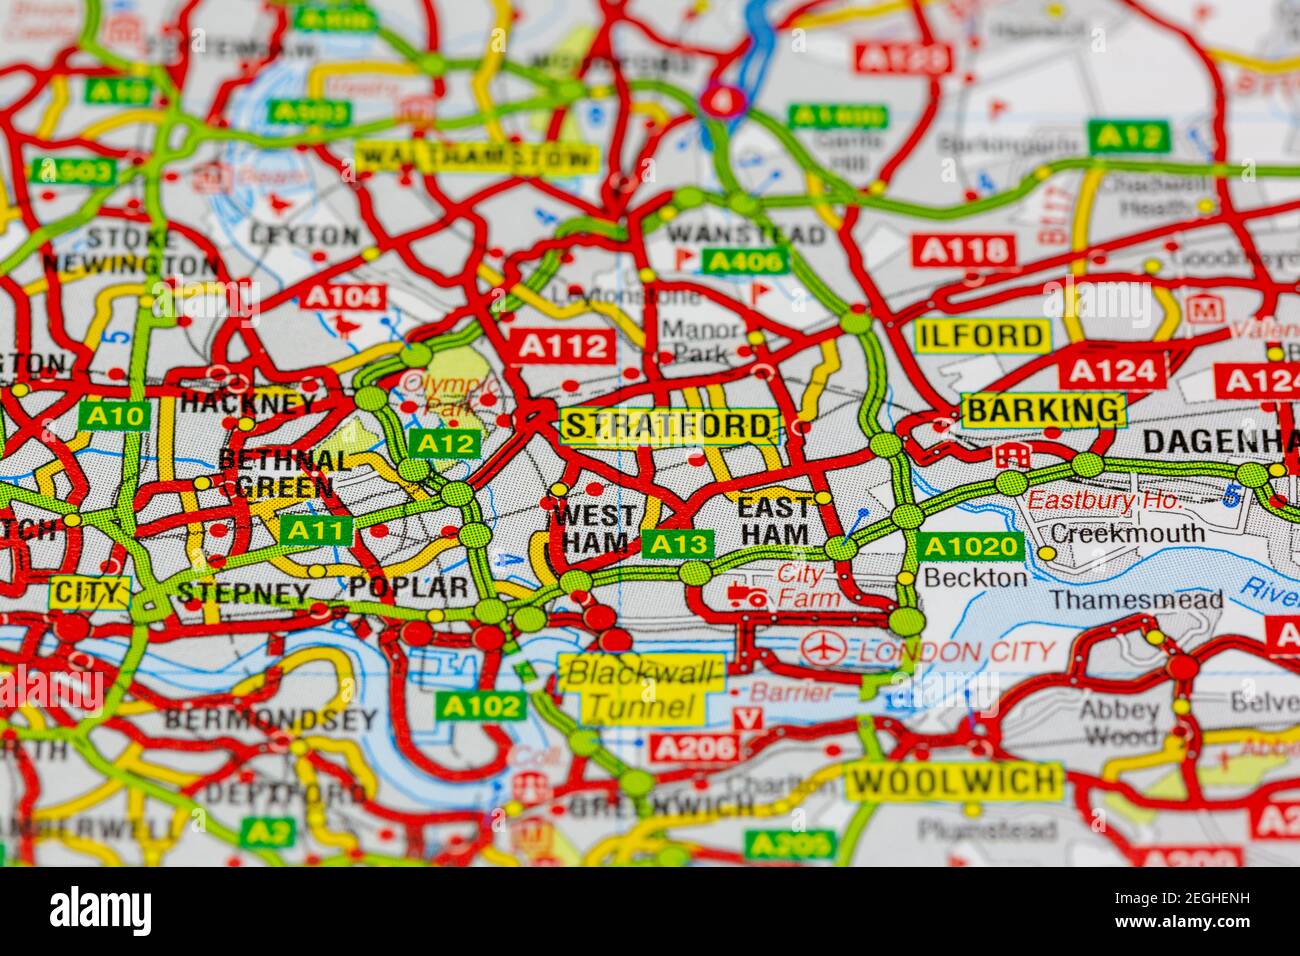 Stratford and surrounding areas shown on a road map or geography map Stock Photo